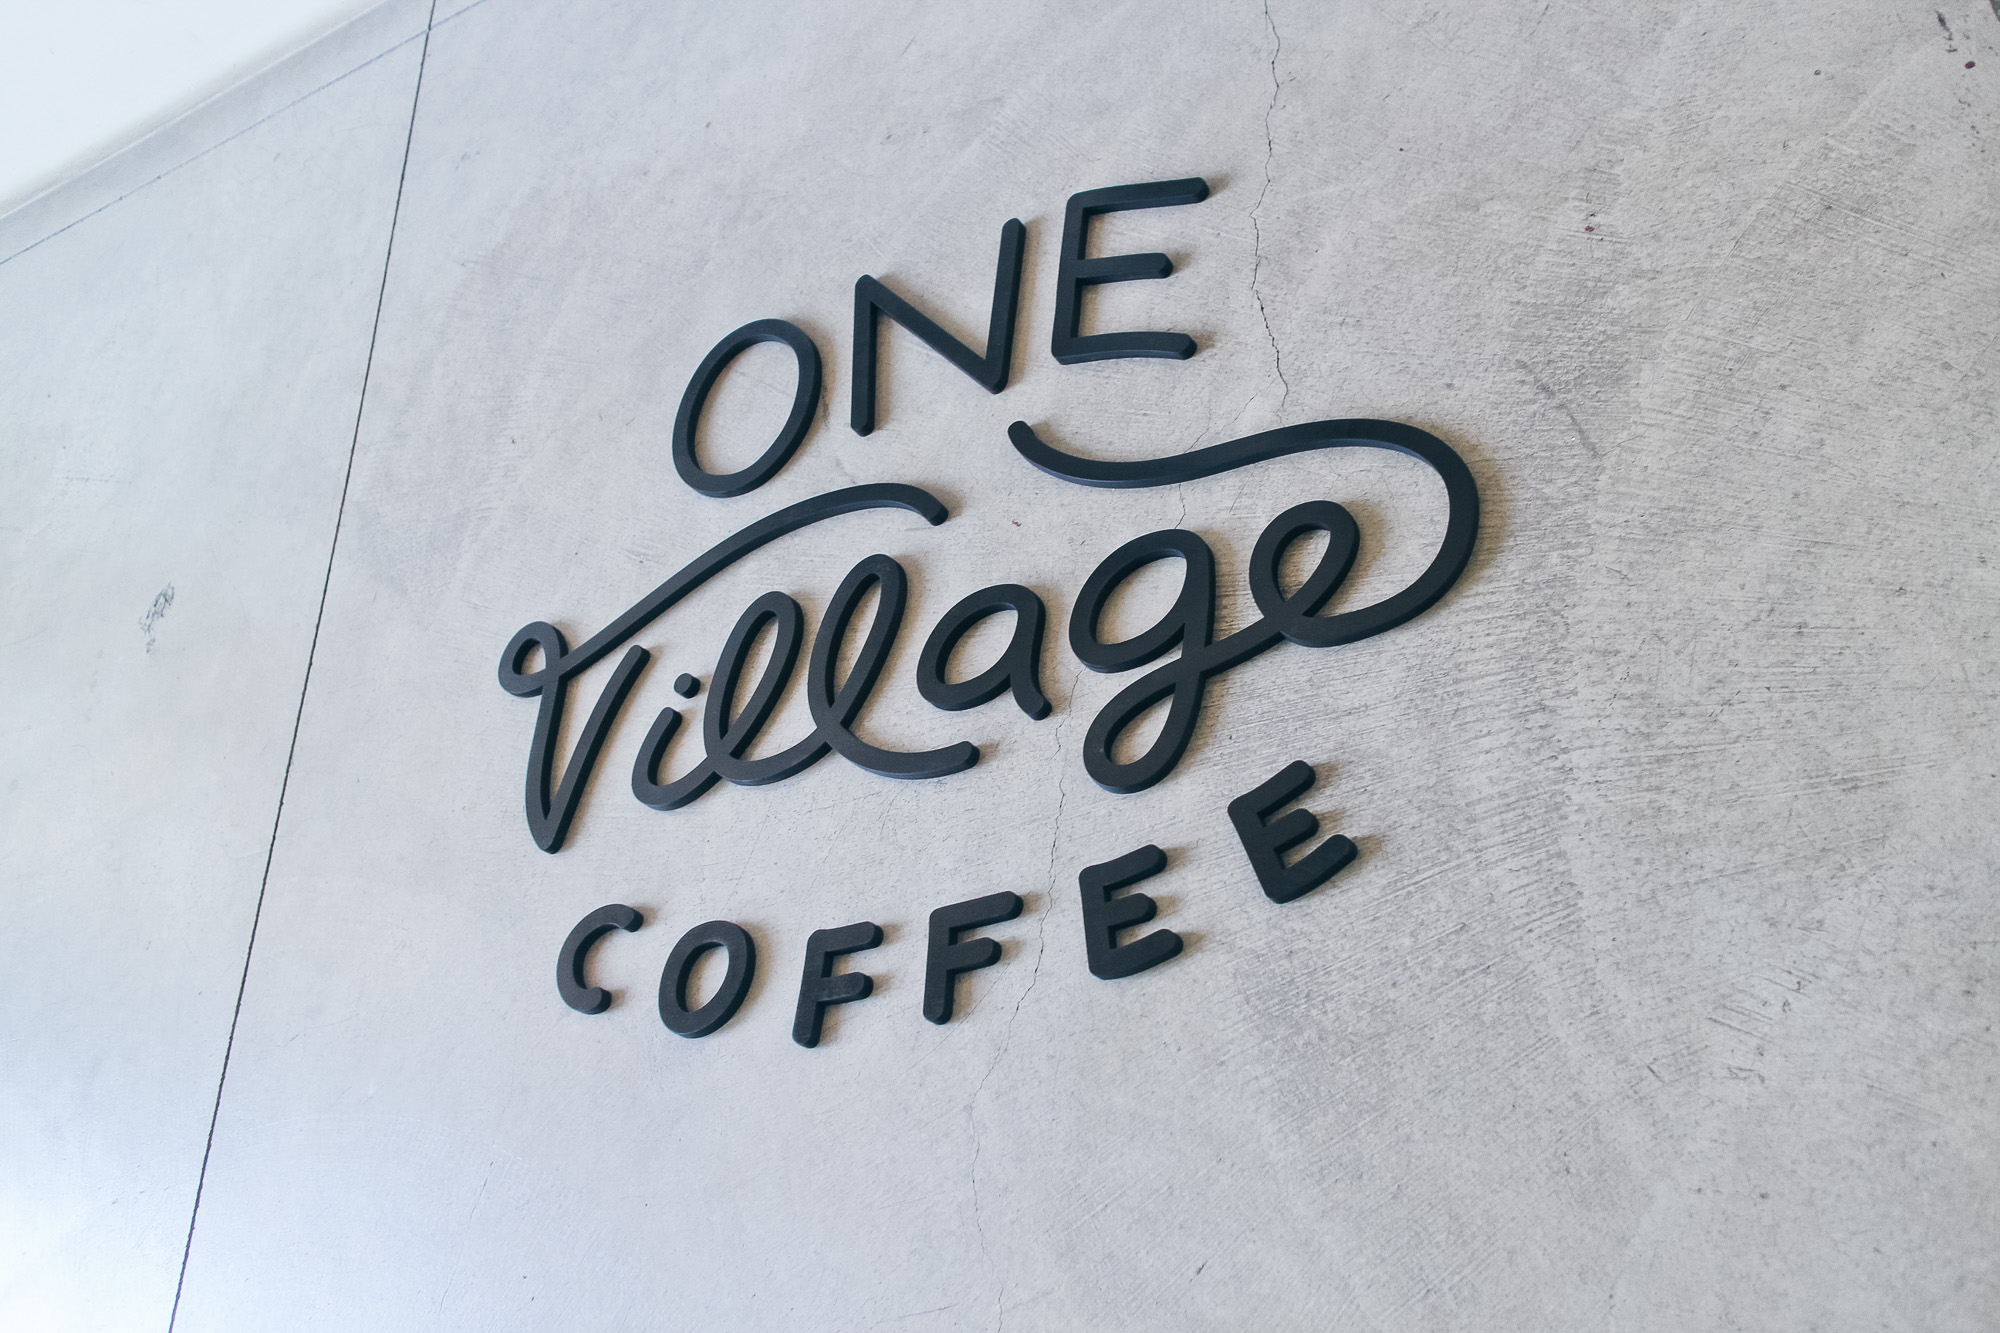 Black script sign for One Village Coffee, a specialty coffee roaster based in Souderton, PA.